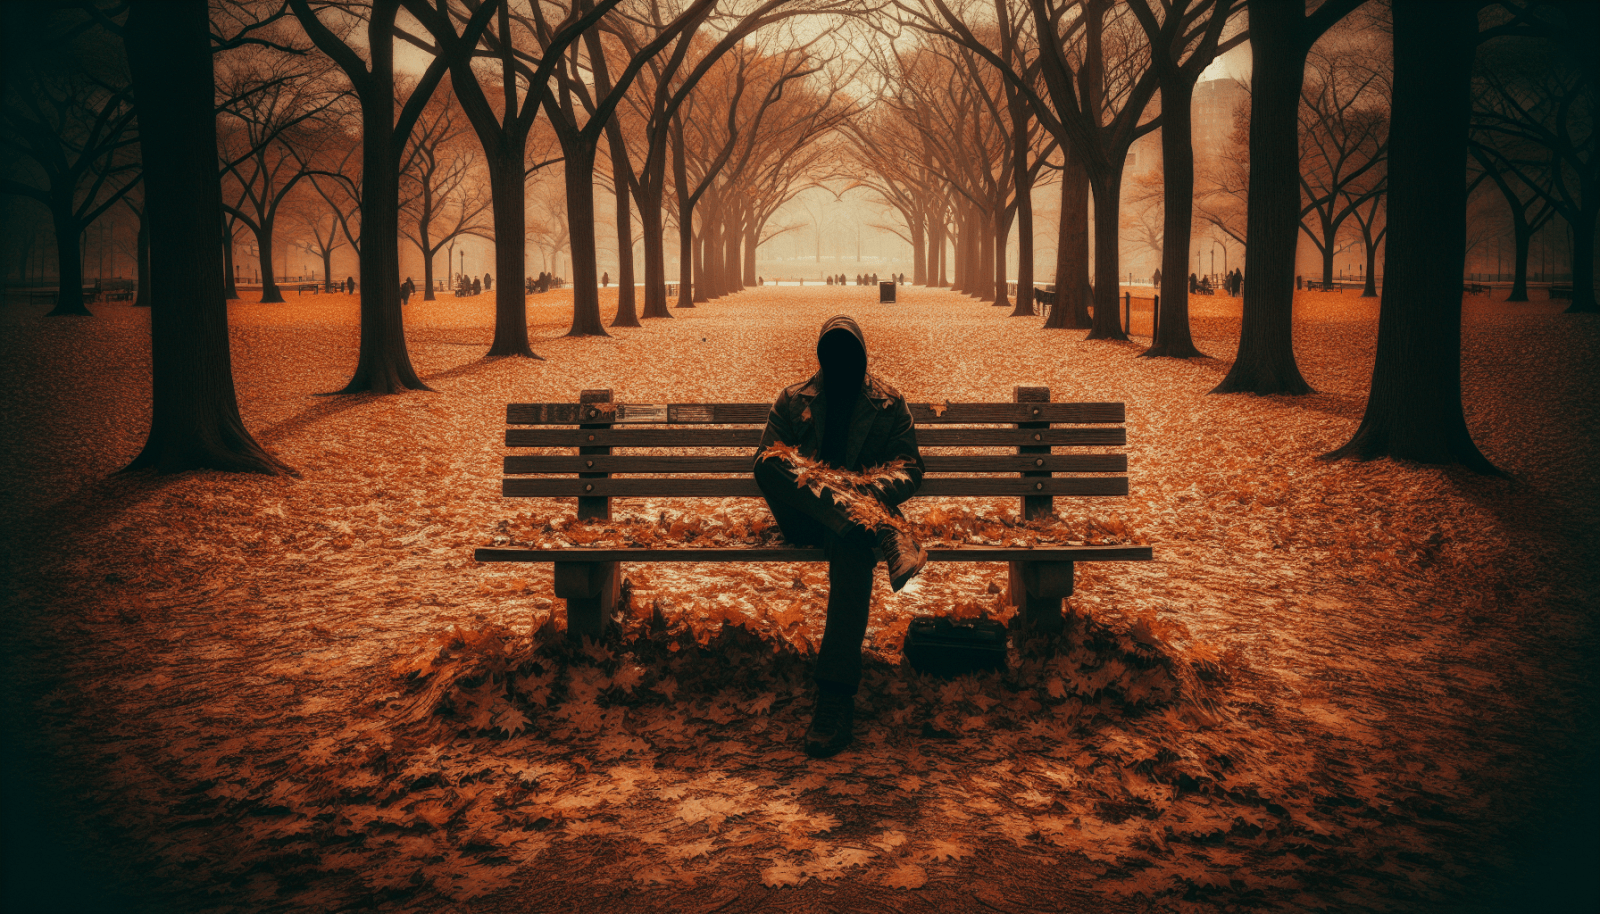 A person seated on a park bench amidst a setting of autumnal trees and fallen leaves, with a misty and serene backdrop.